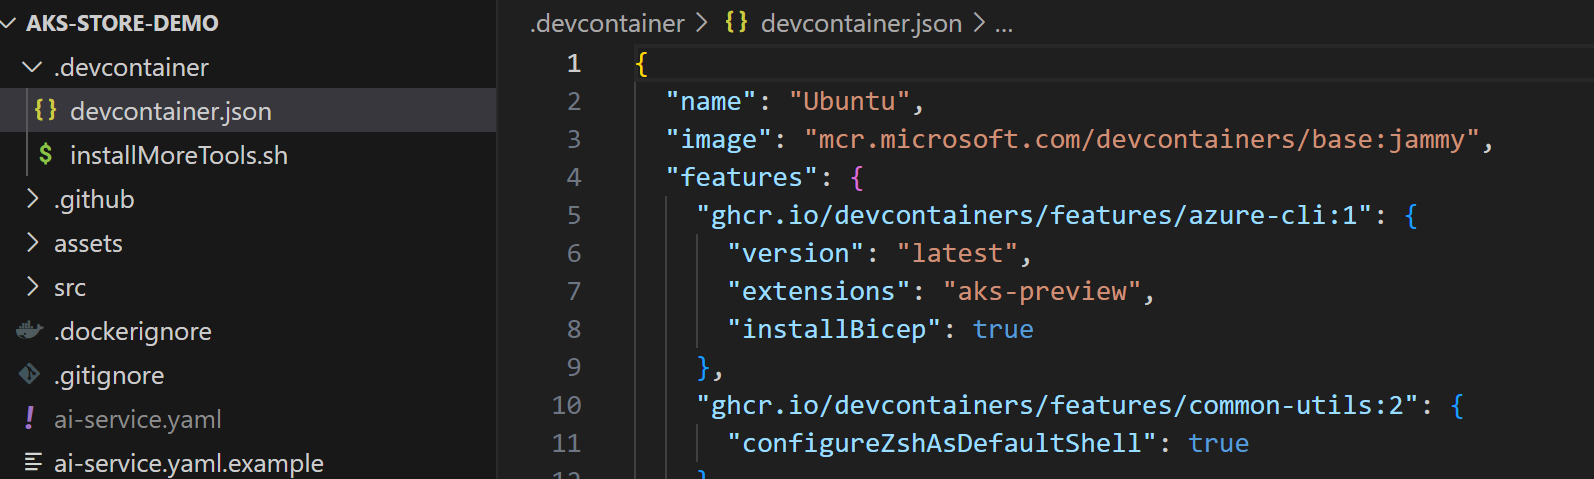 A VS Code screenshot showing some code from the devcontainer.json file